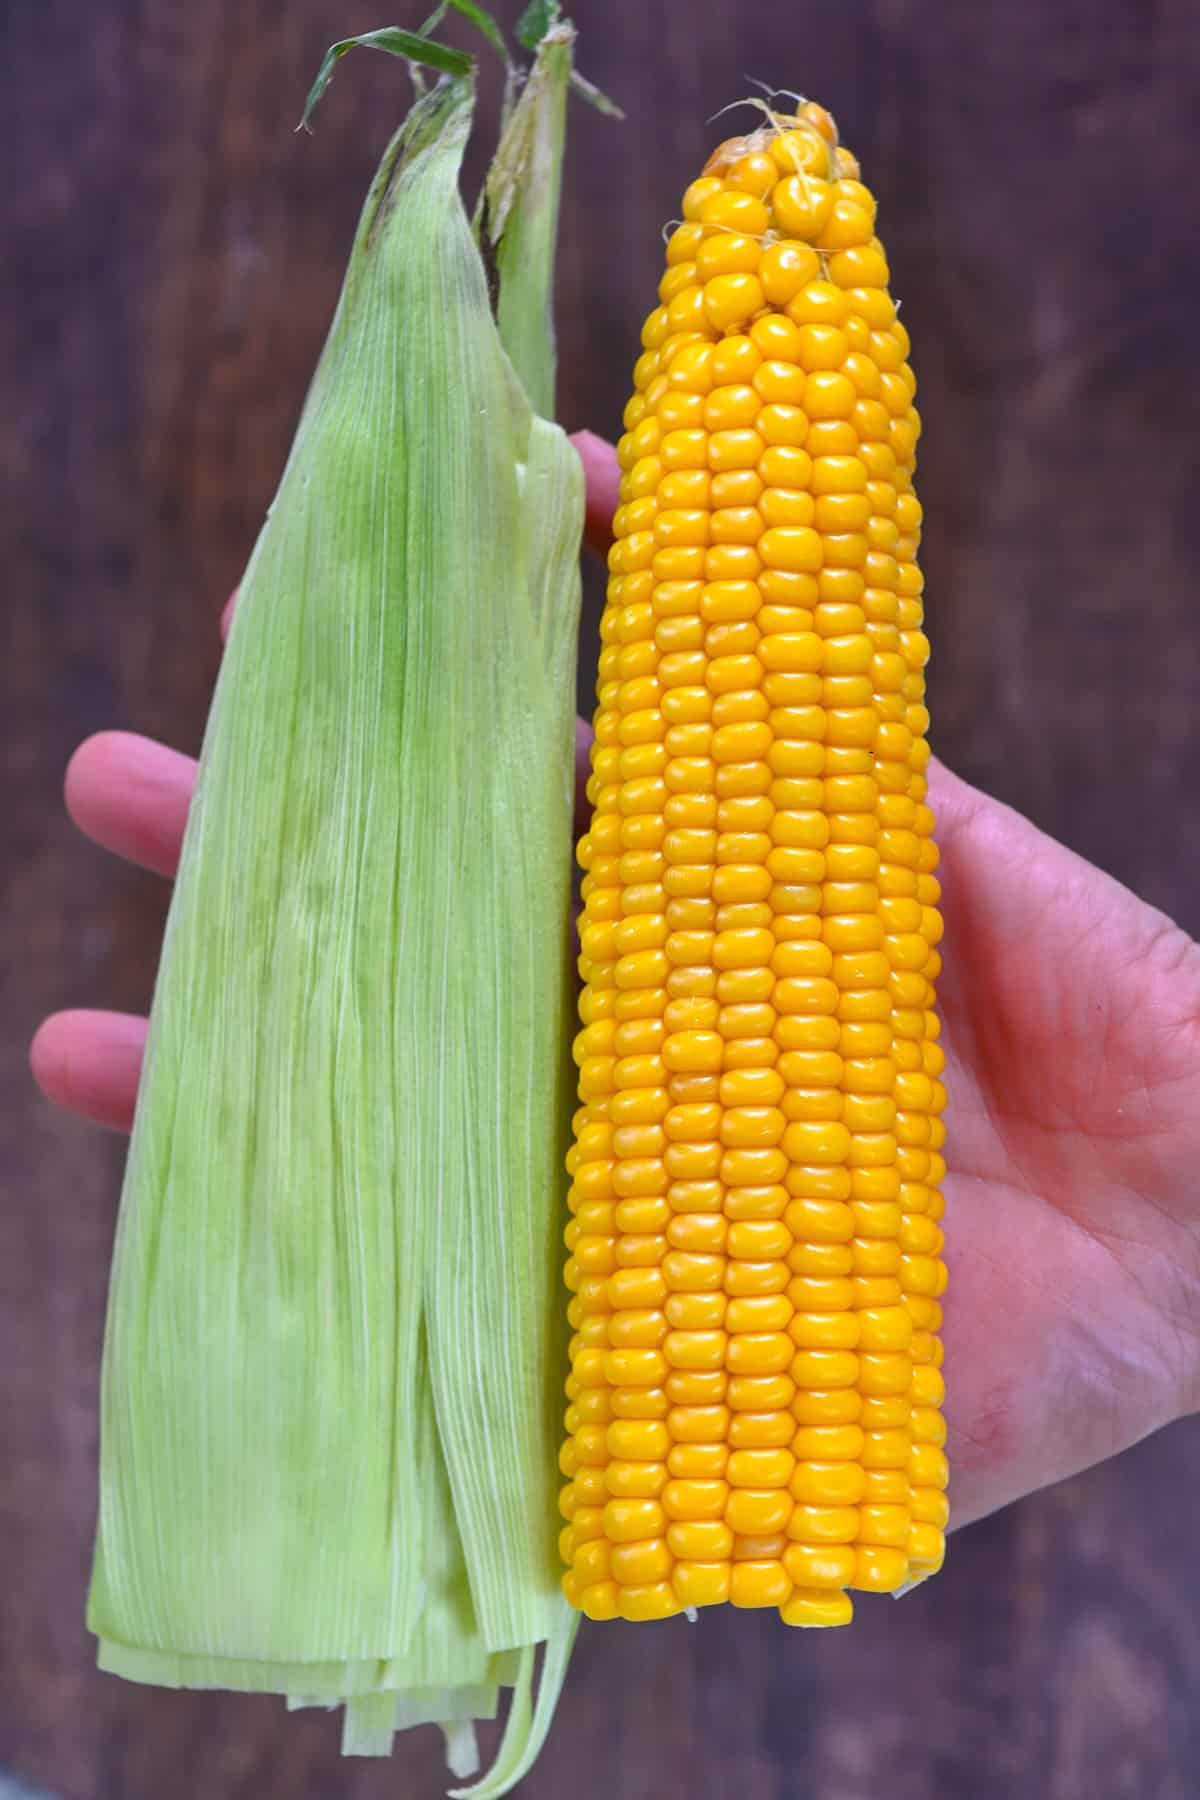 Corn on the cob with removed husk